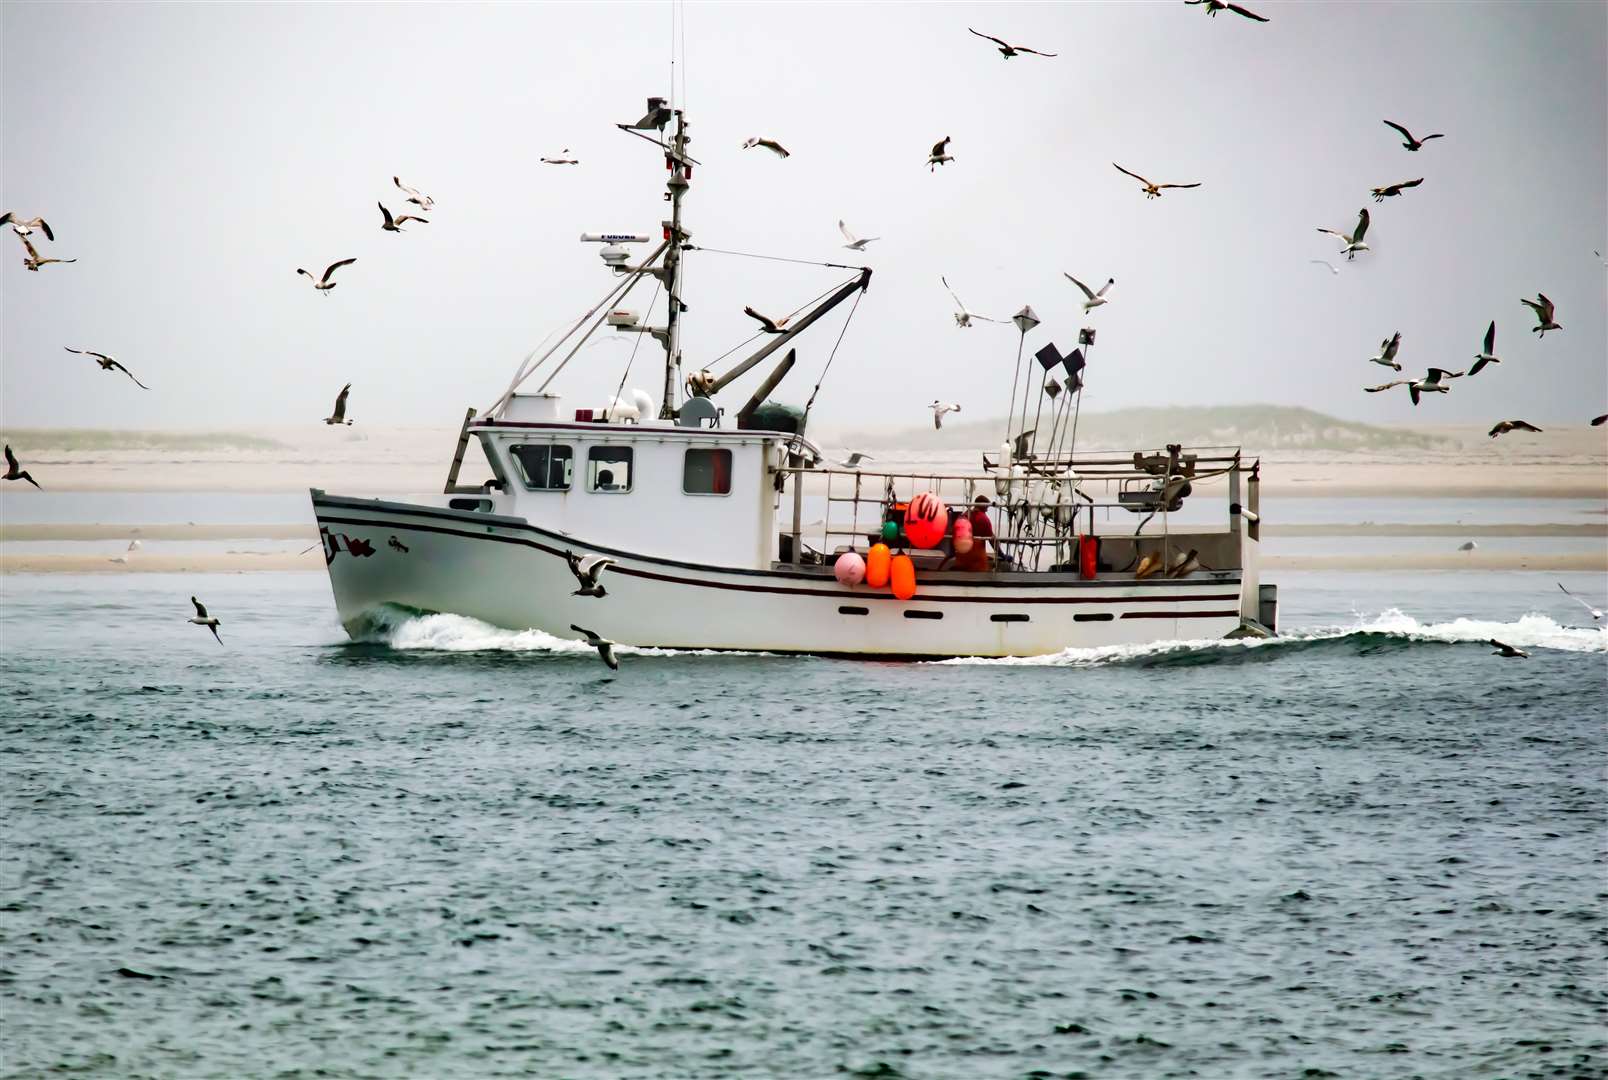 The report shows that there were 22 registered fishing vessels at both Kinlochbervie and Lochinver at December 31 – two per cent of the Scottish total of 2088. There were 197 fishers at Lochinver and 48 at Kinlochbervie, five per cent of the national total.